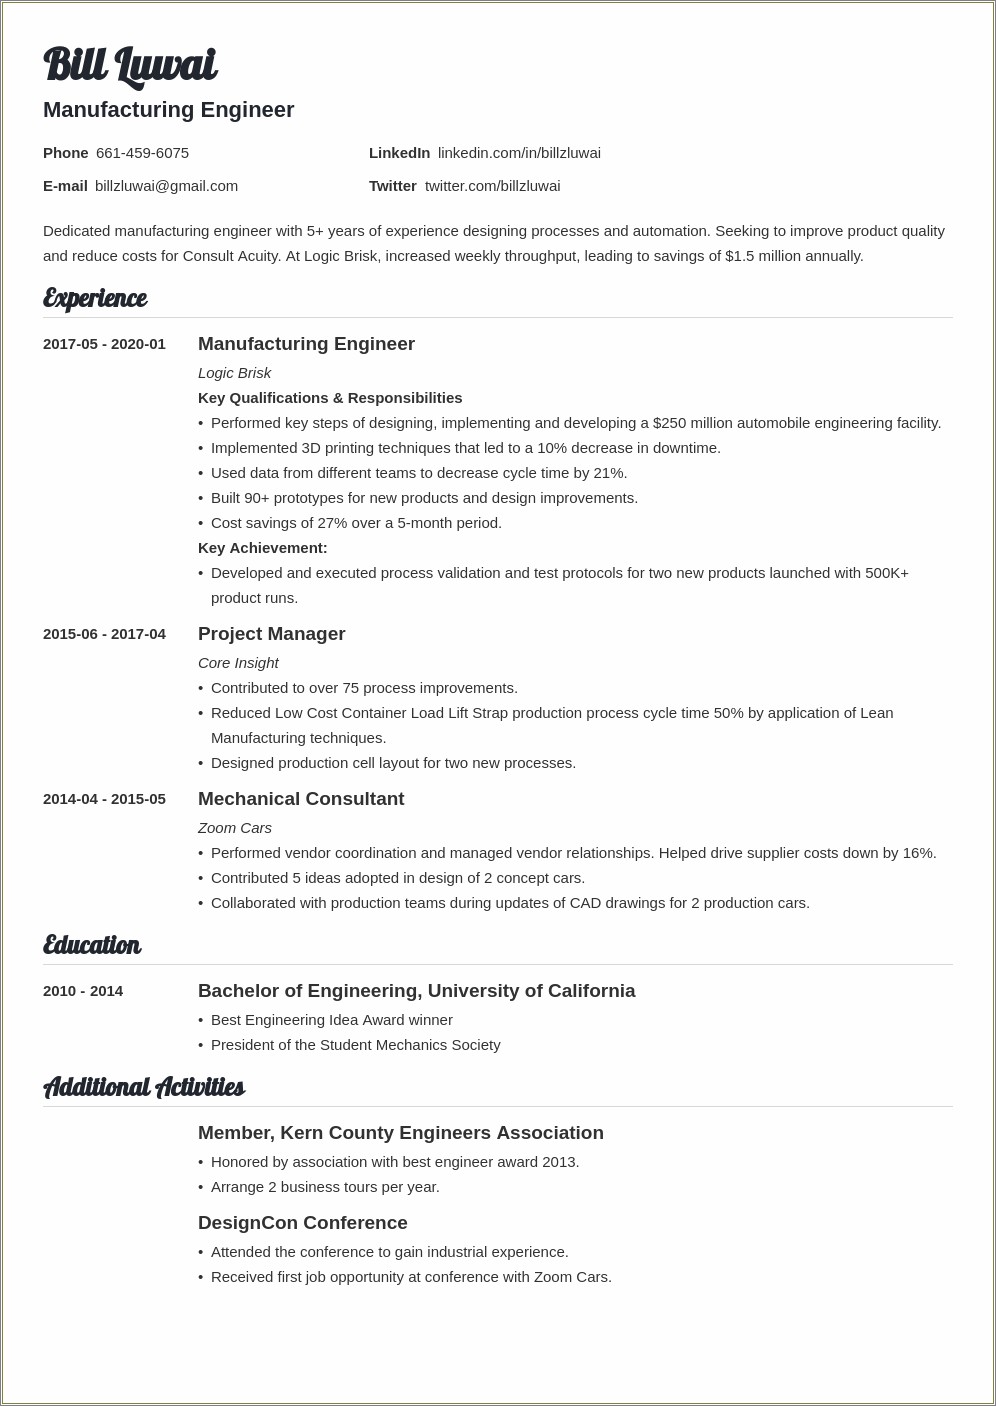 Resume And Cover Letter Conference Unh